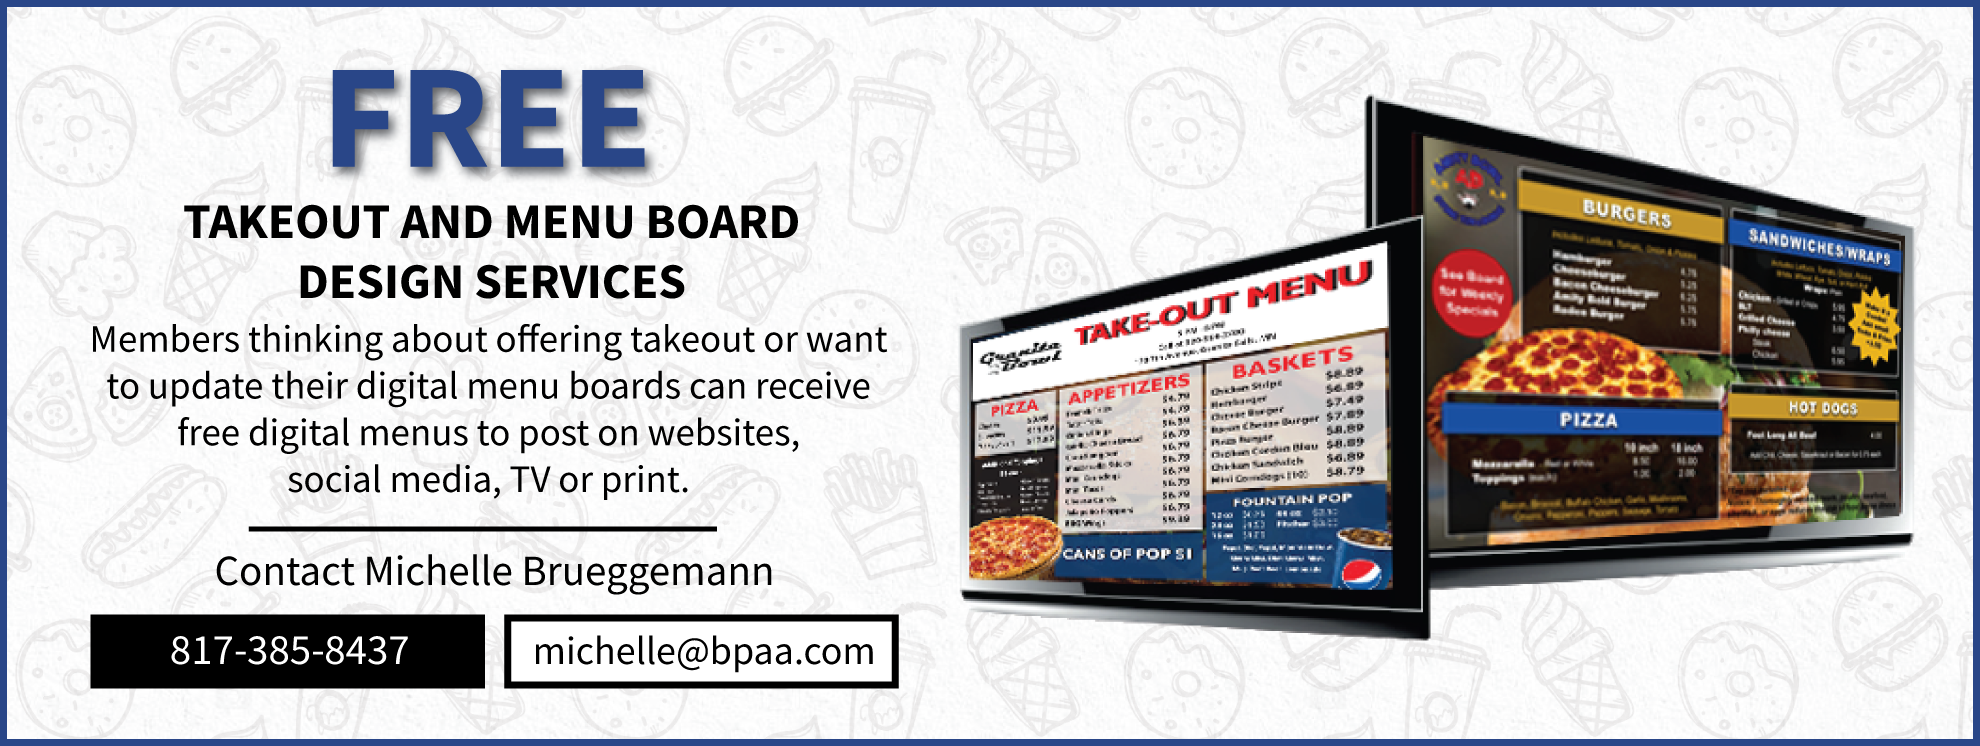 Menu board and takeout